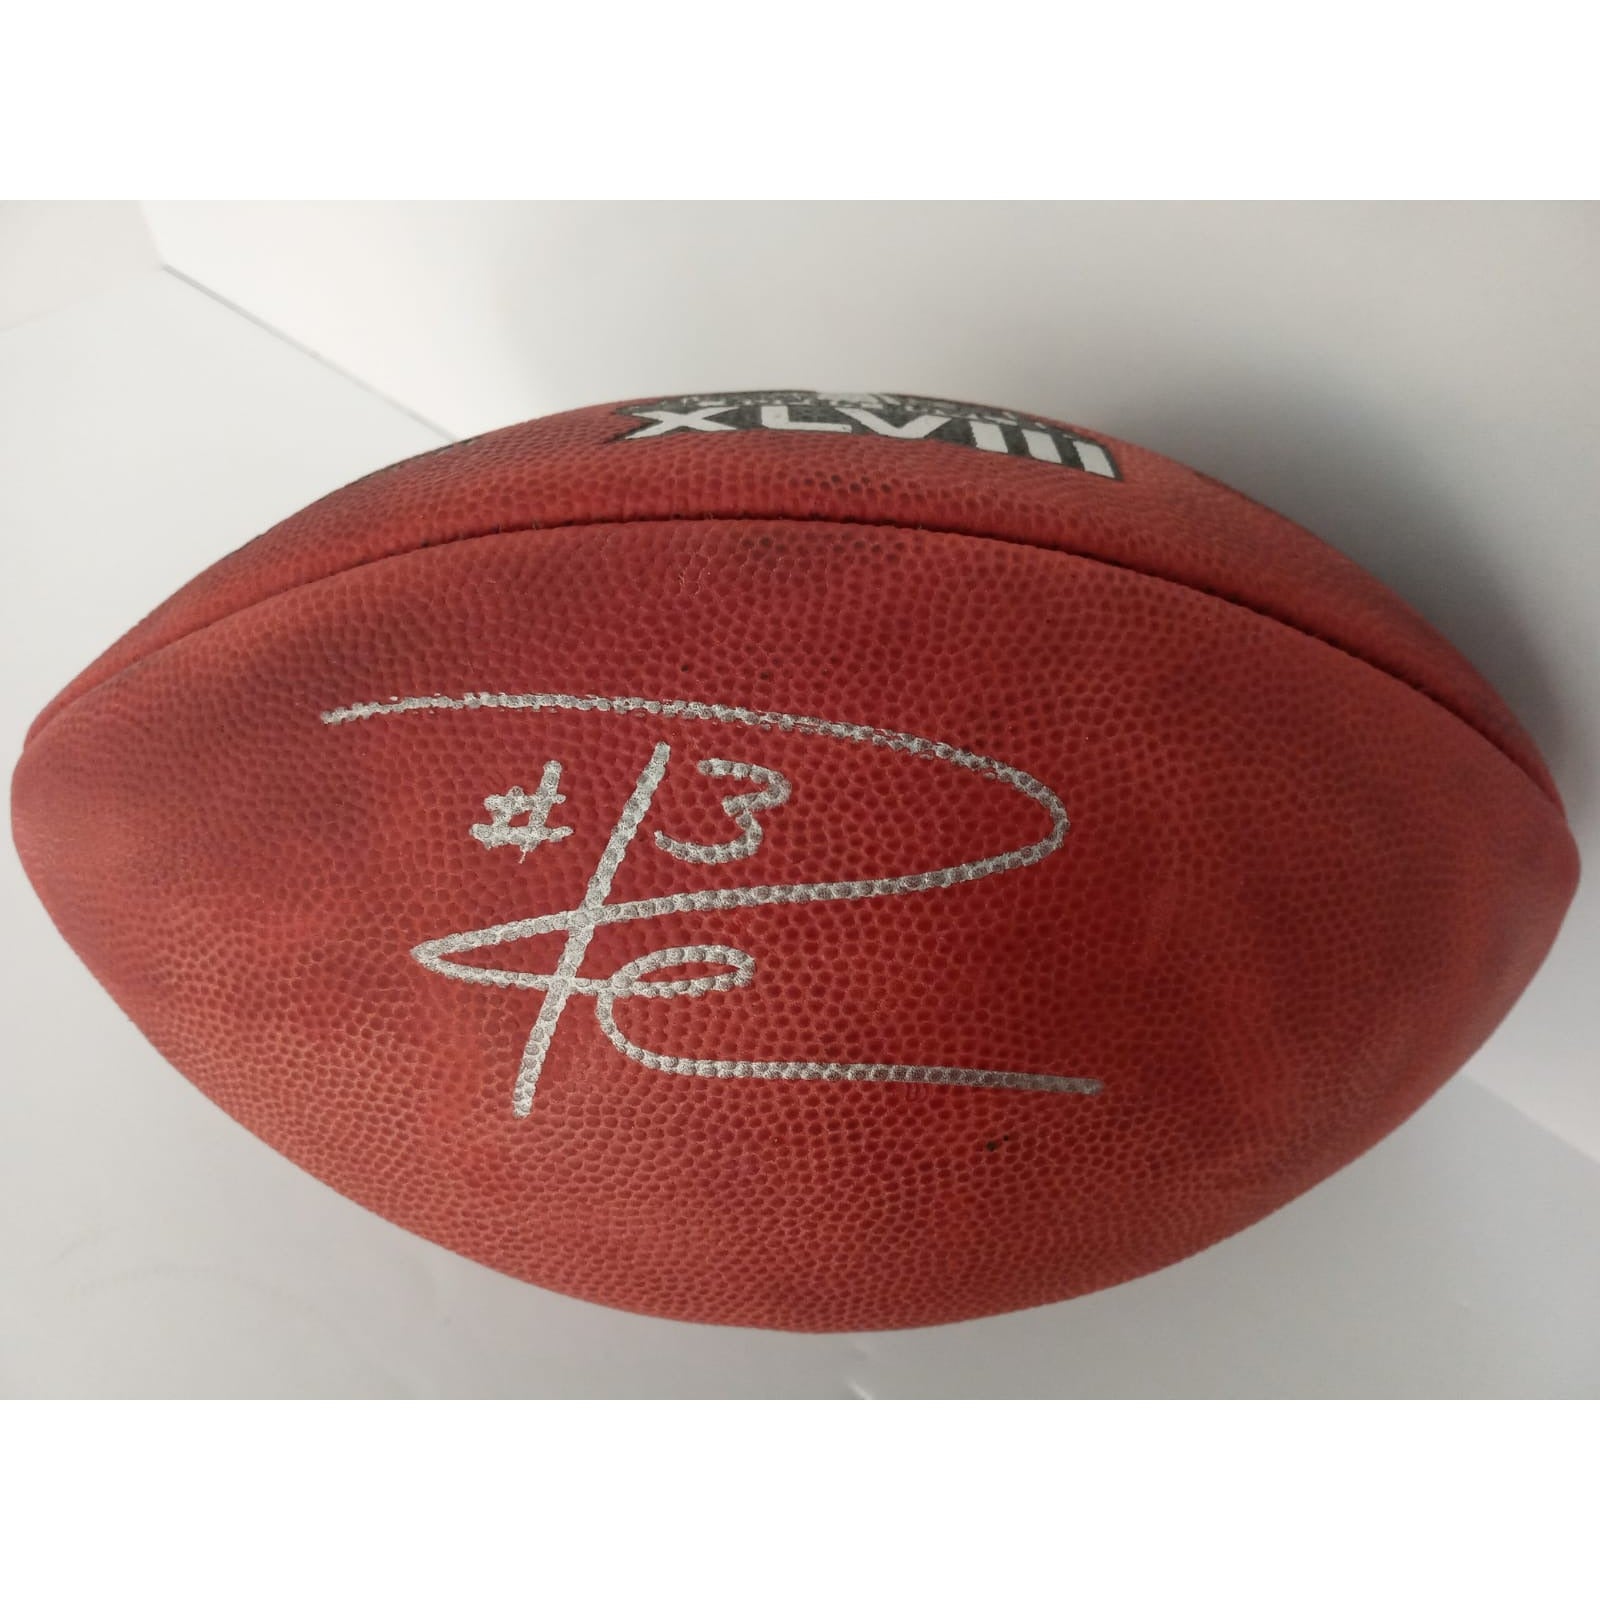 Seattle Seahawks Russell Wilson Super Bowl game NFL football